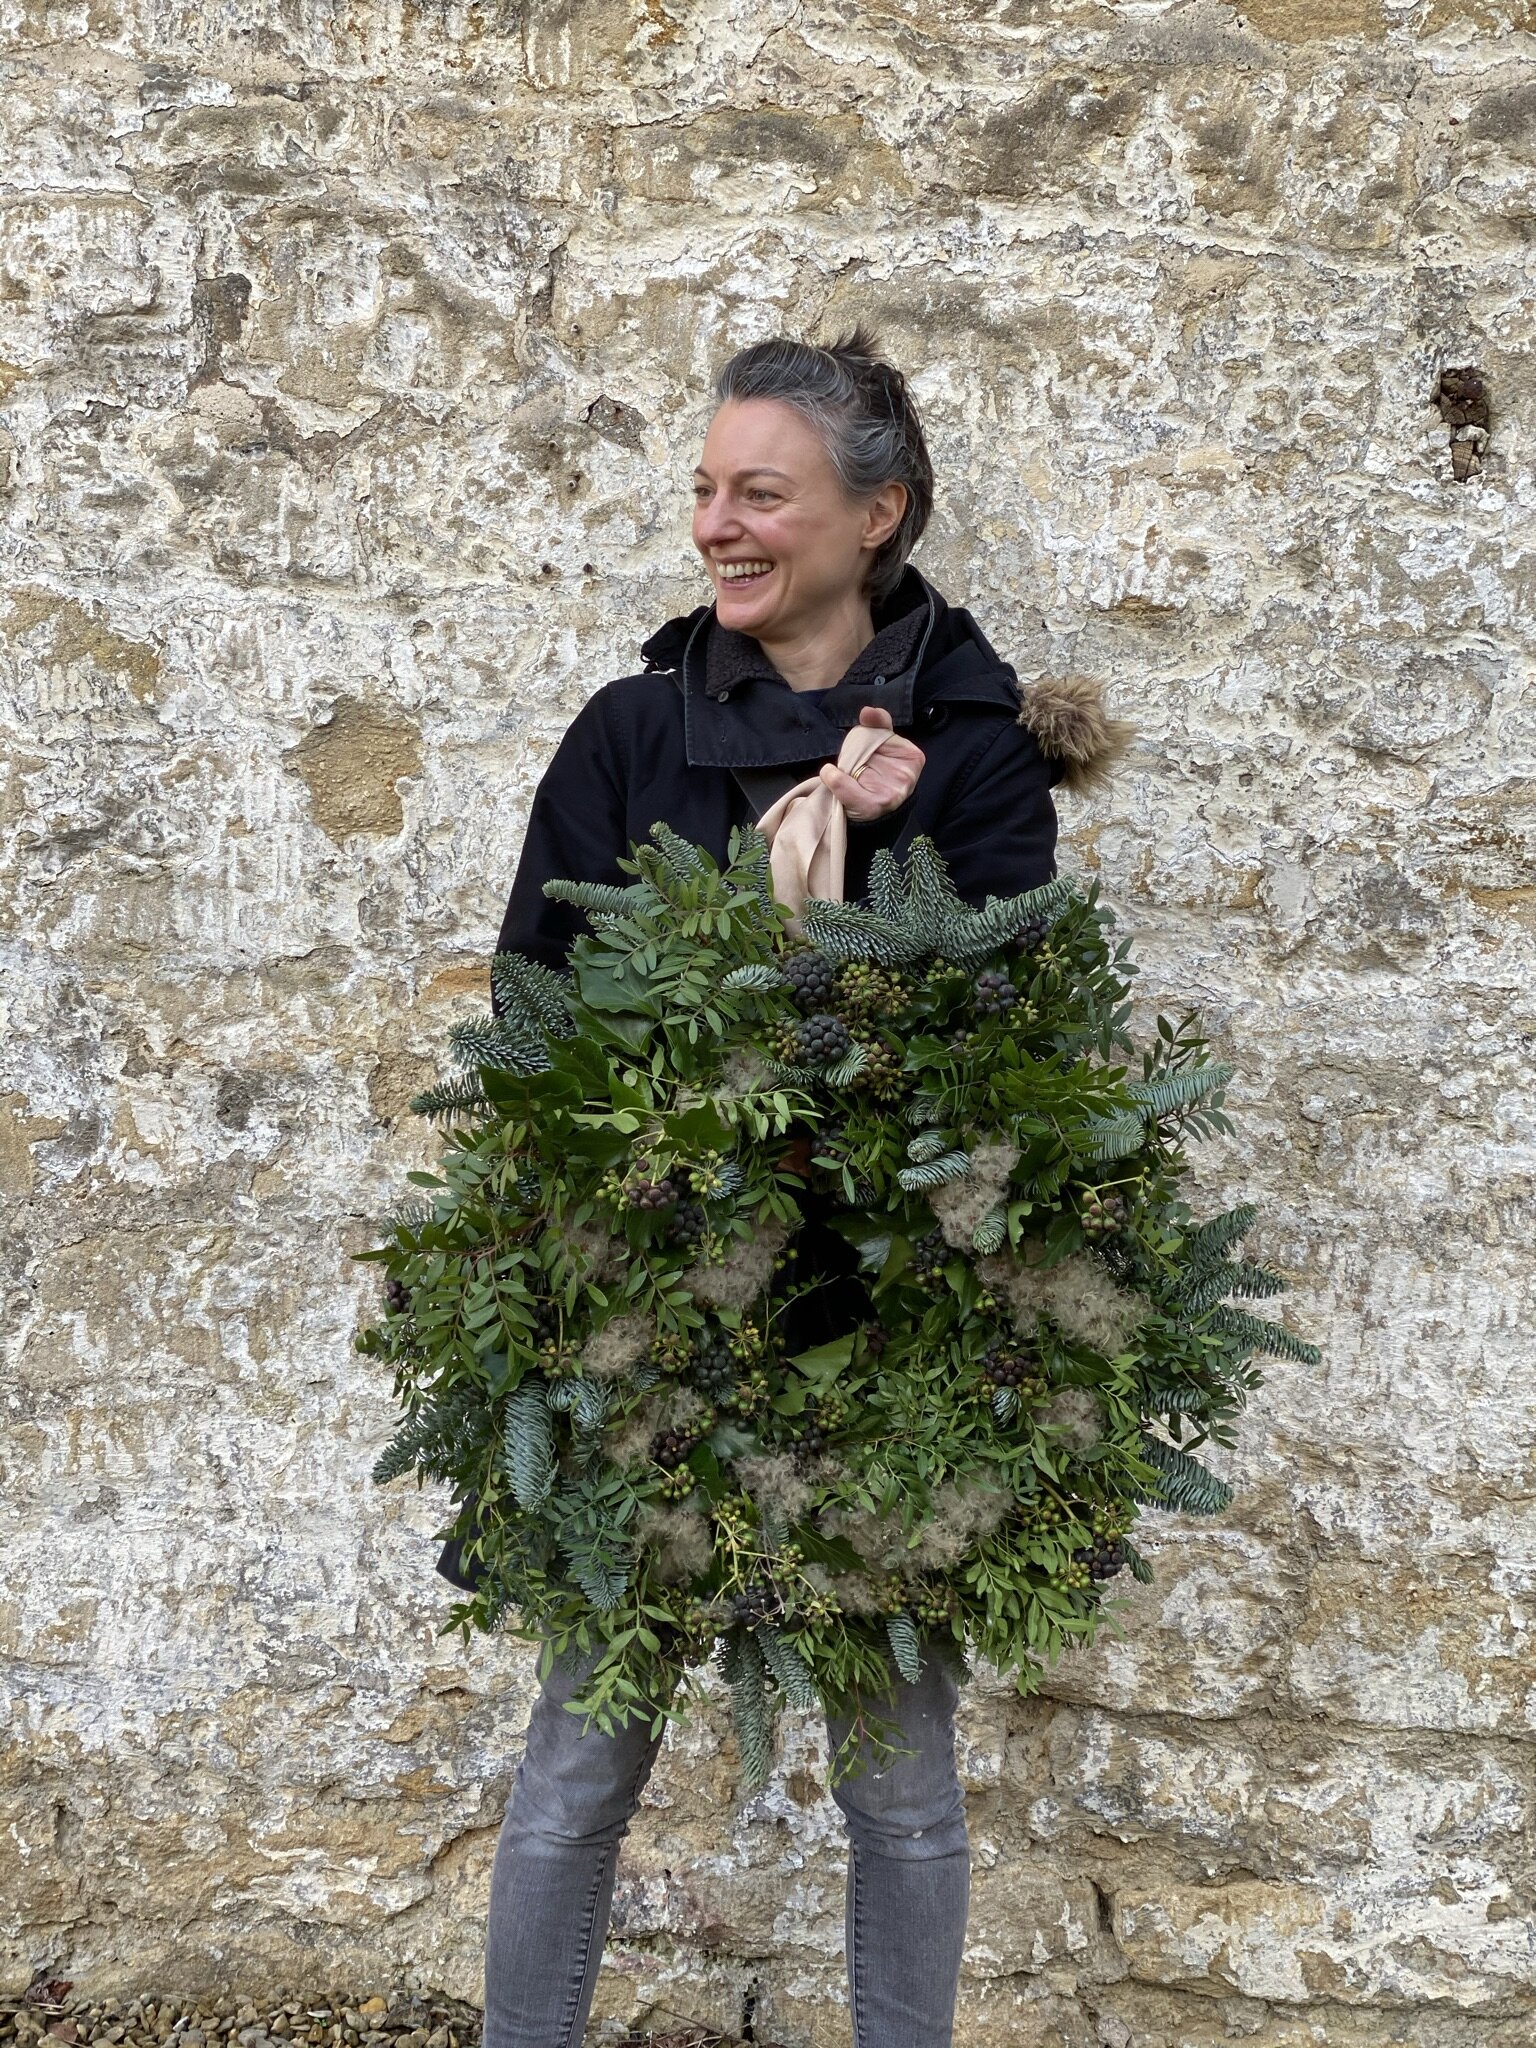 Hedgerow inspired Christmas wreath being held by student in front of a brick wall (Copy)